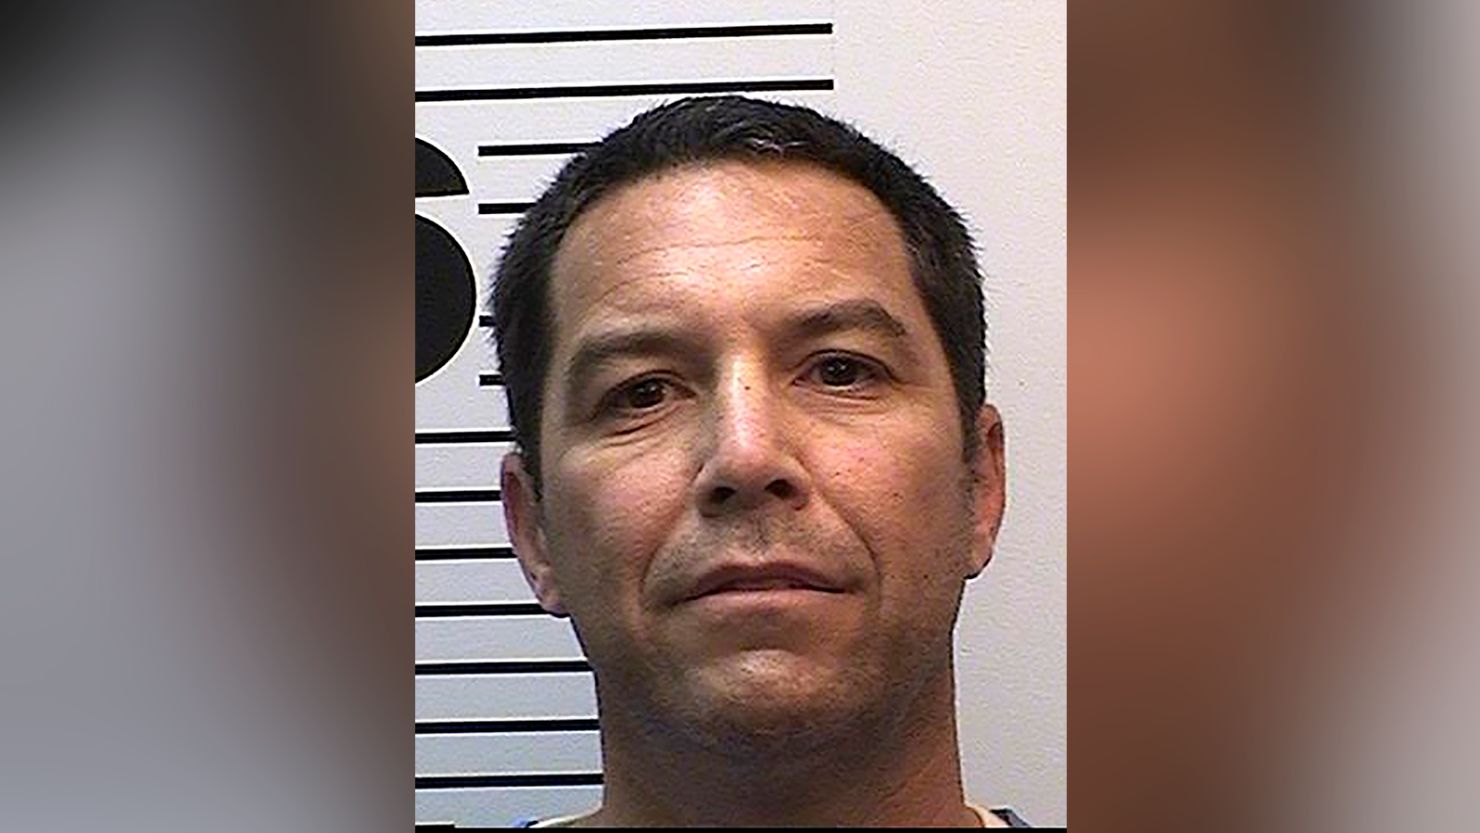 Scott Peterson was resentenced to life in prison, although his conviction remains under review.